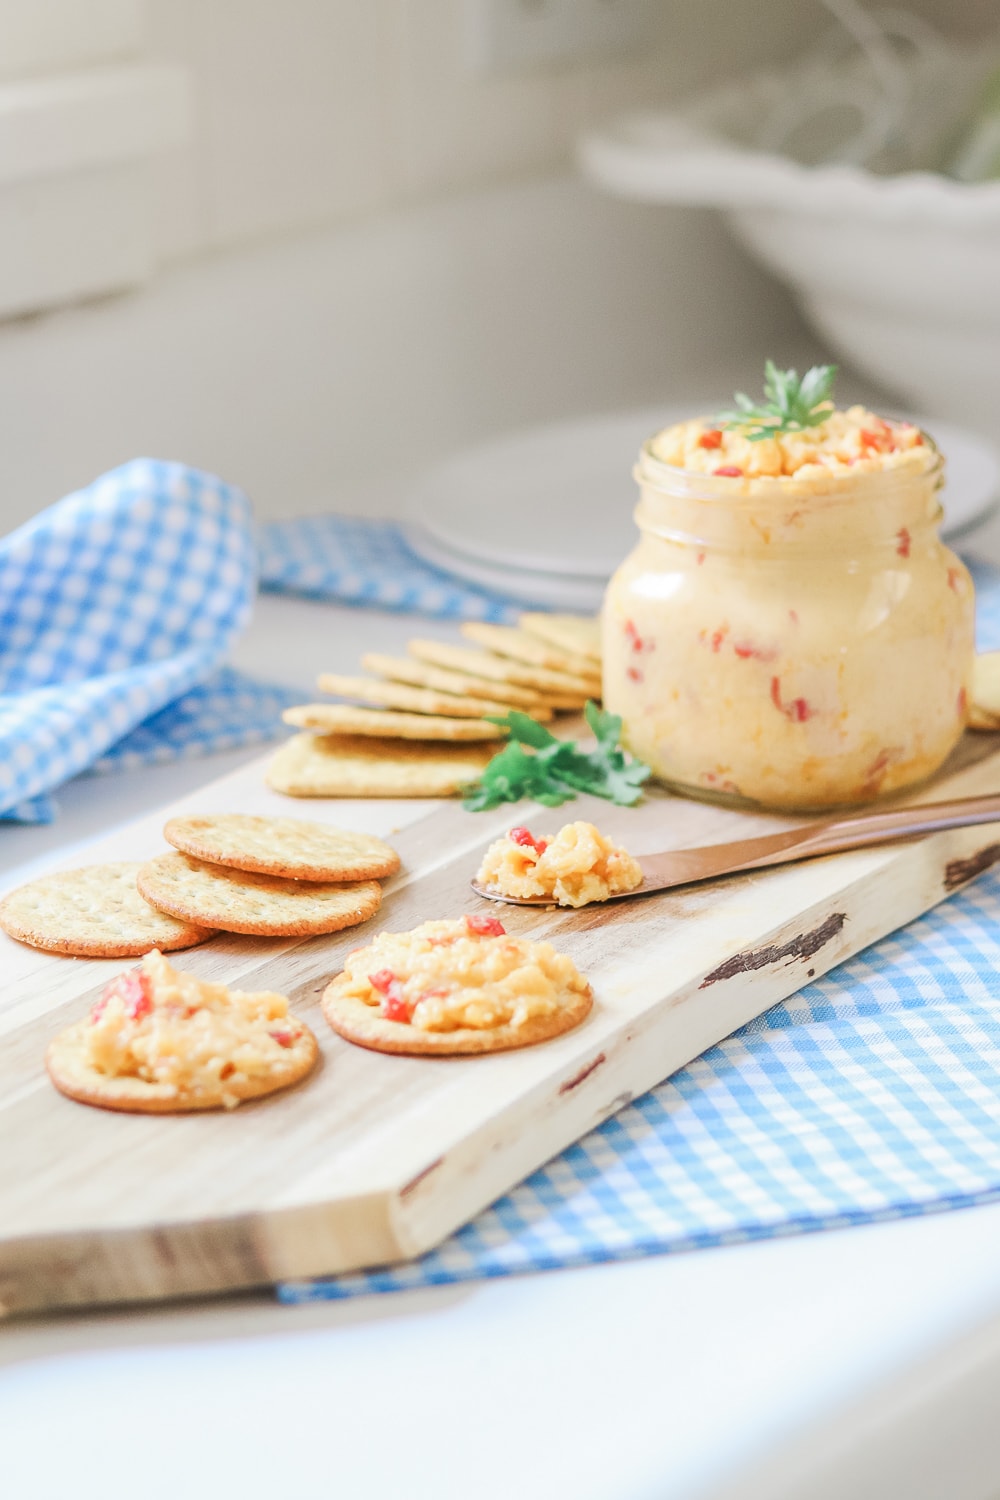 The best pimento cheese dip recipe, which can be served cold or baked, from southern lifestyle blogger Stephanie Ziajka on Diary of a Debutante